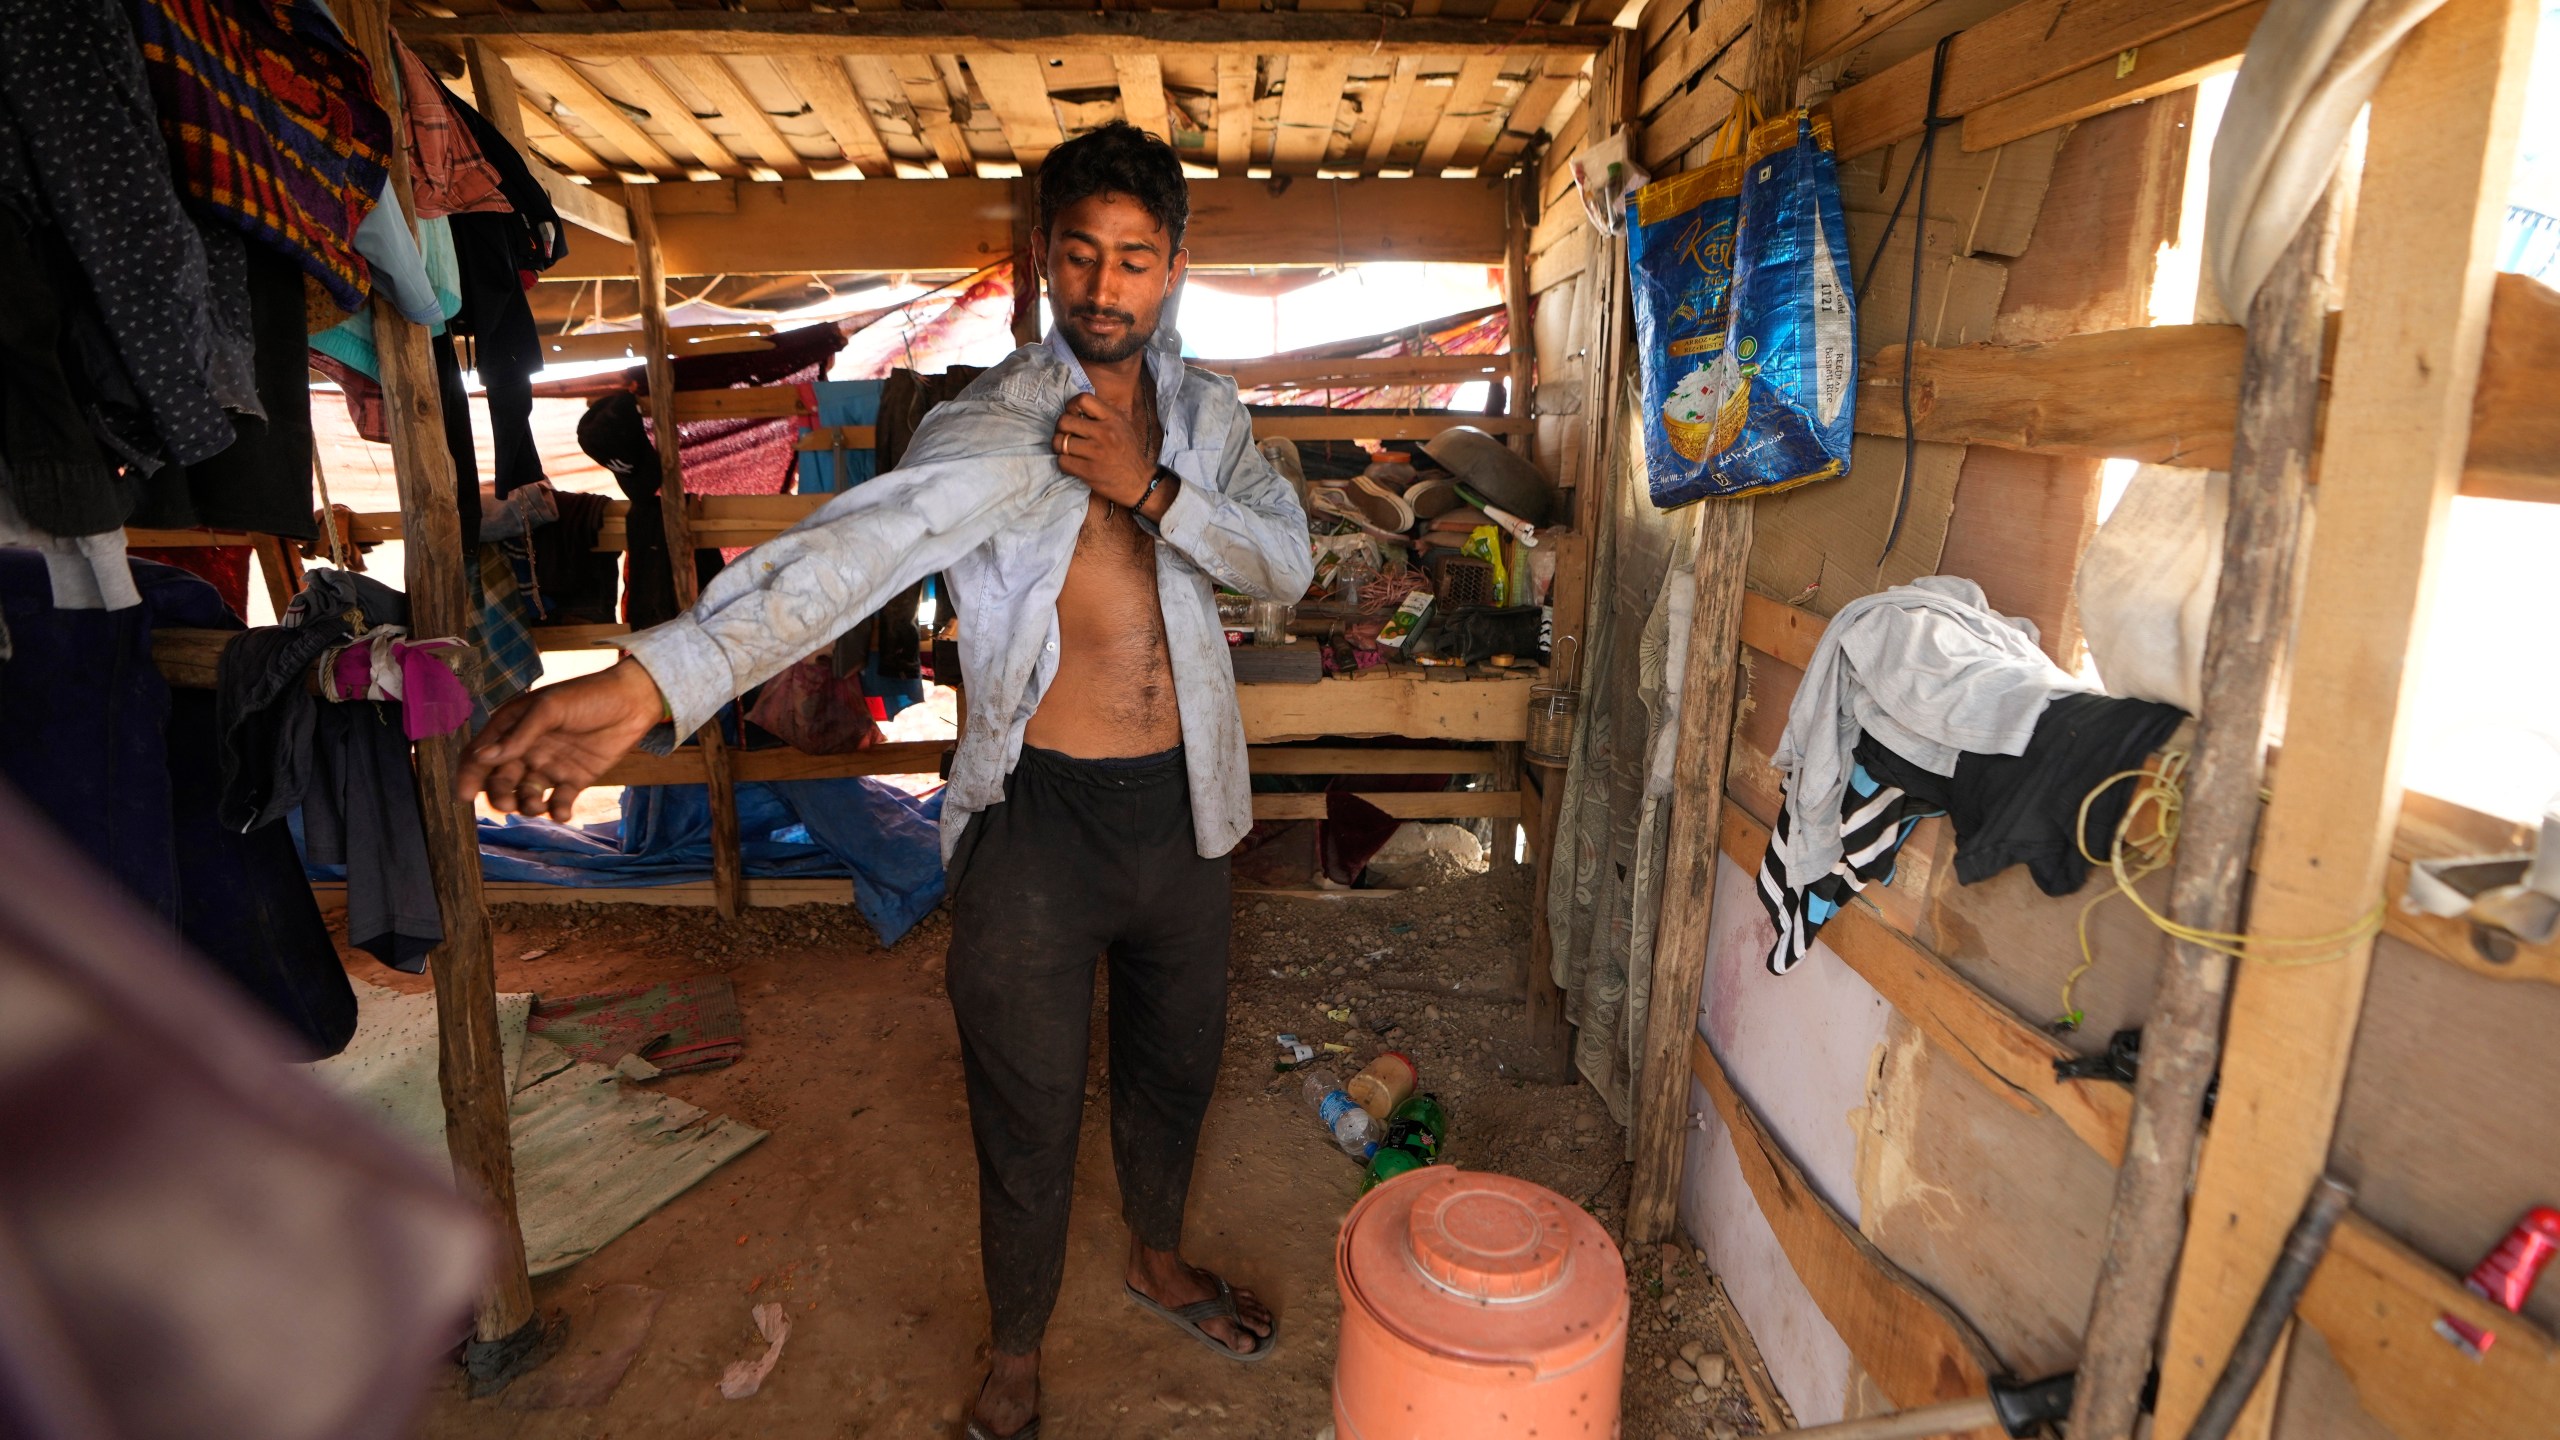 Aamir Shekh puts on a shirt before heading out in a heat wave to a garbage dump on the outskirts of Jammu, India, Wednesday, June 19, 2024. Shekh and his family are among millions of people who scratch out a living searching through India's waste — and climate change is making a hazardous job more dangerous than ever. (AP Photo/Channi Anand)